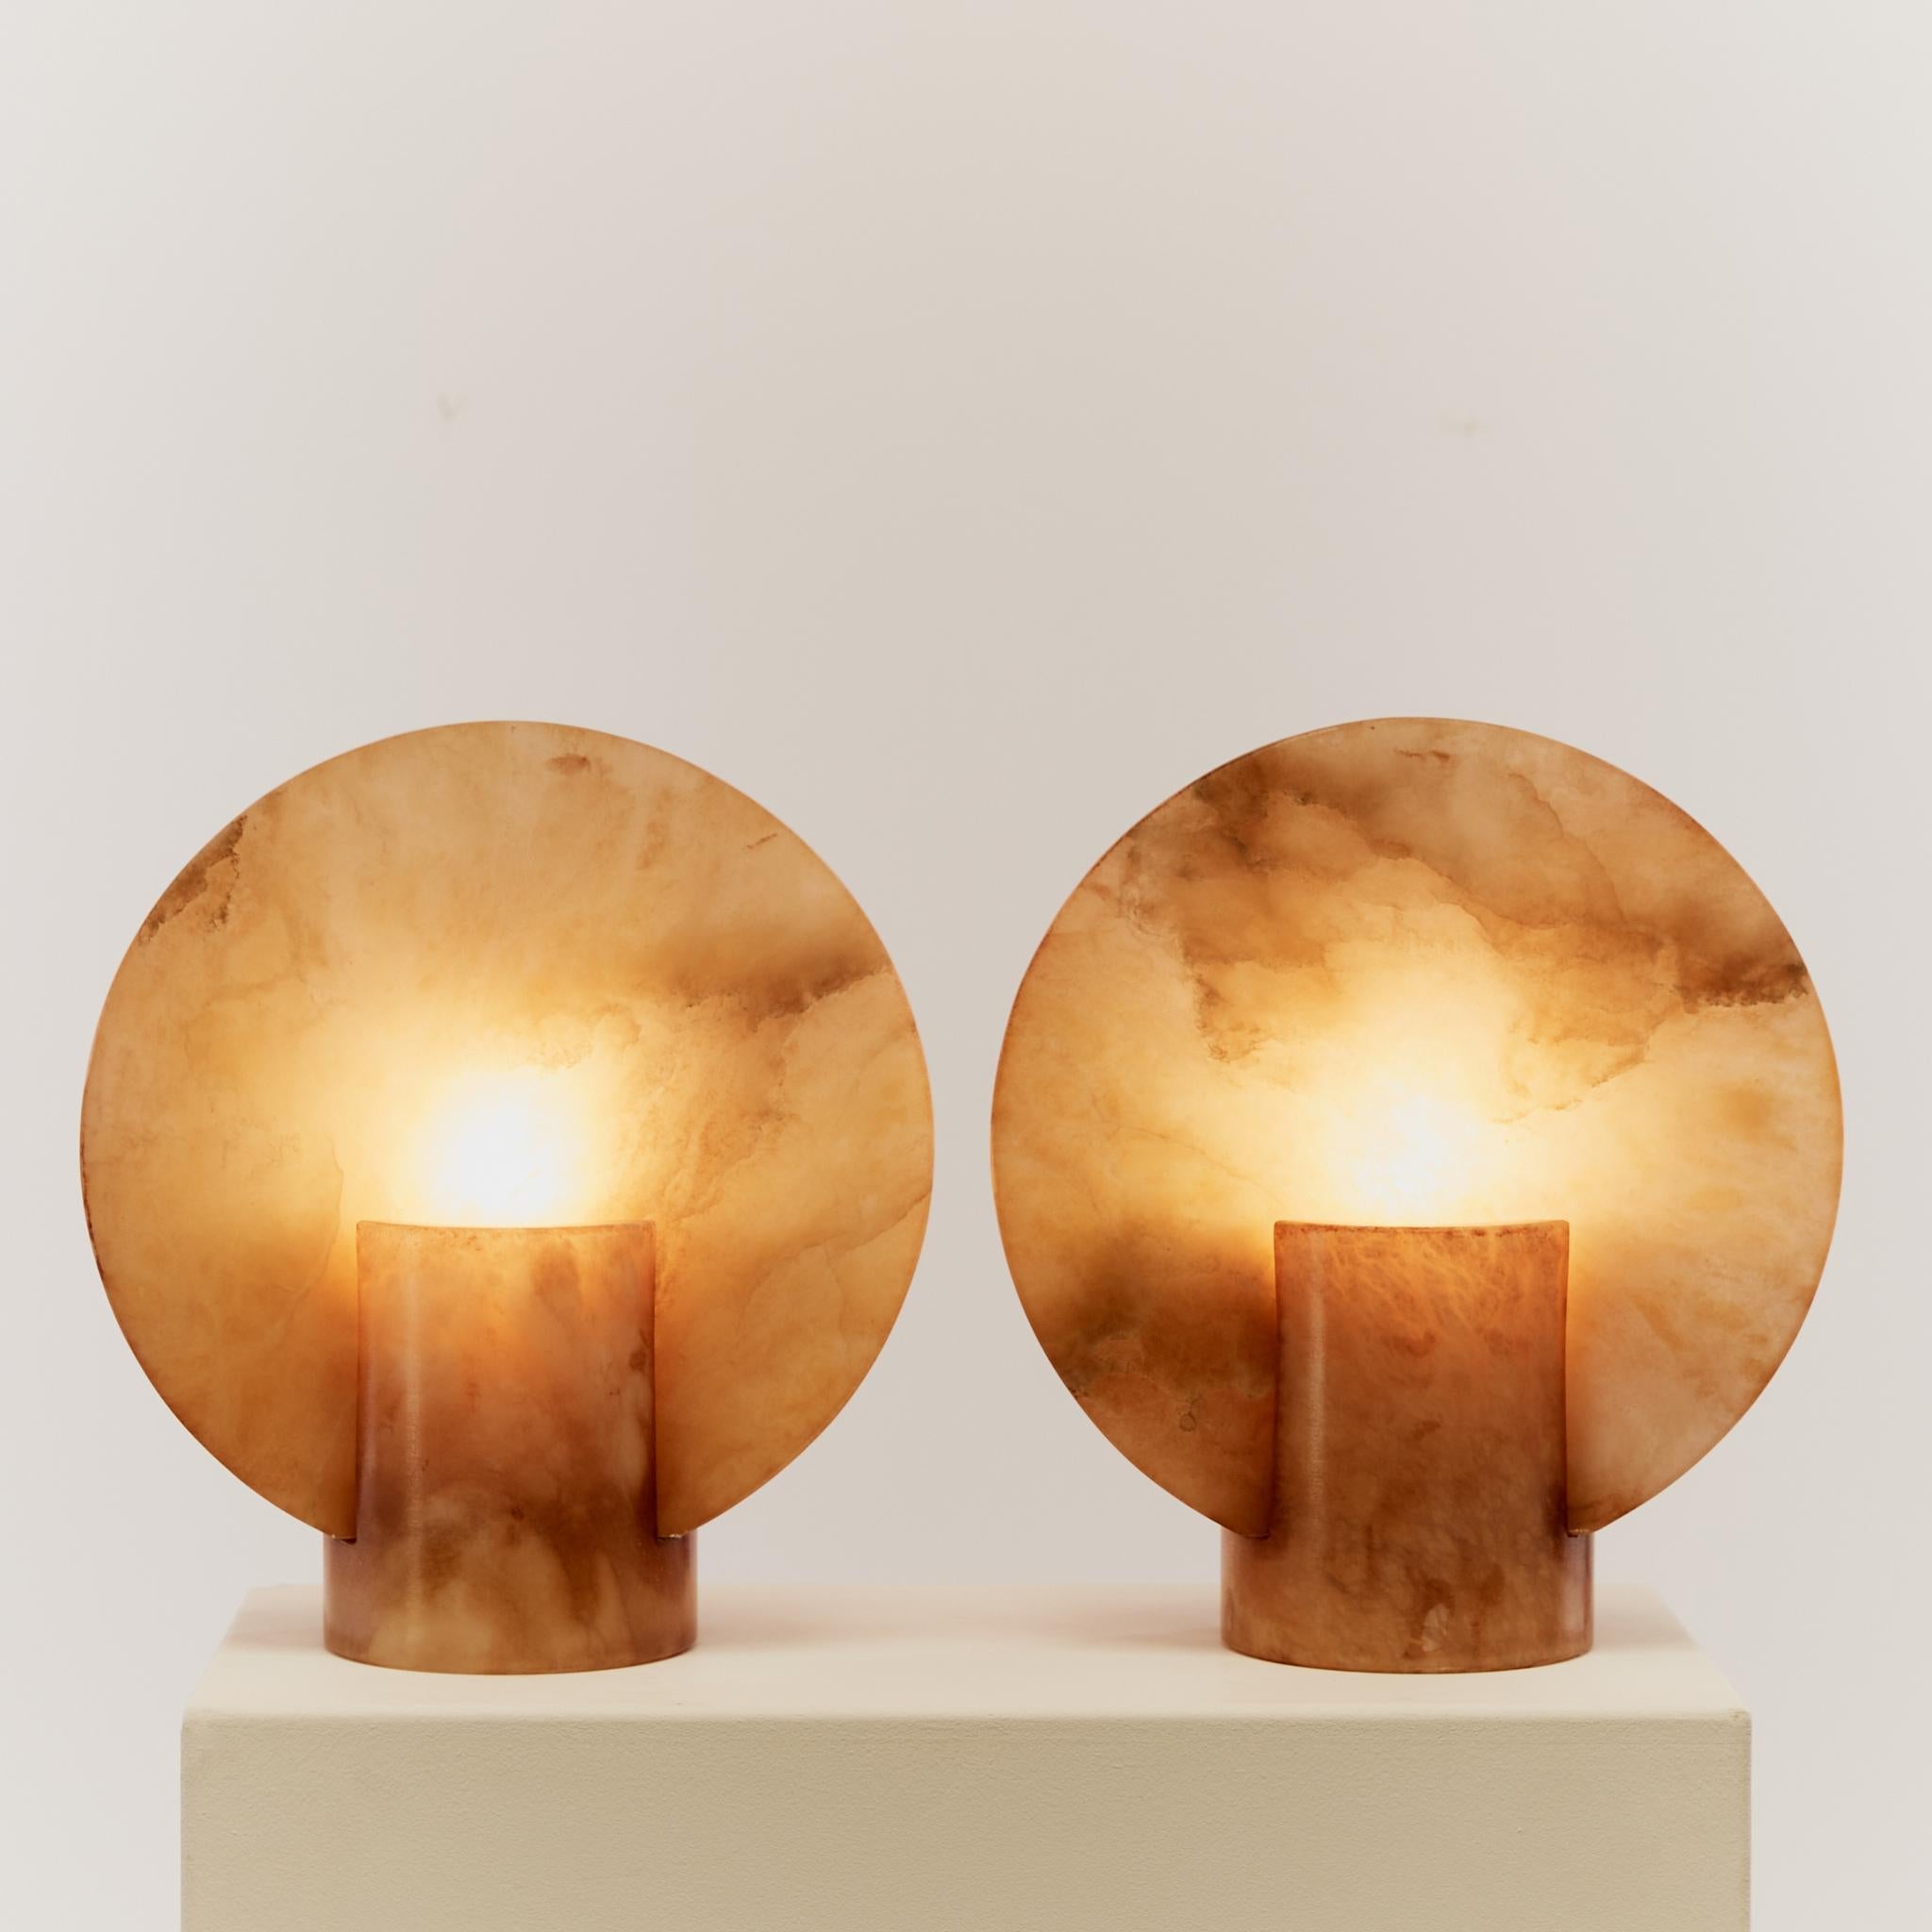 Pair of disc shaped lamps made from amber-toned alabaster. These sculptural lamps give a subtle ambient light and make a great statement pair on any console or mantel piece.

This pair come from a town in Spain that used to host an alabaster quarry